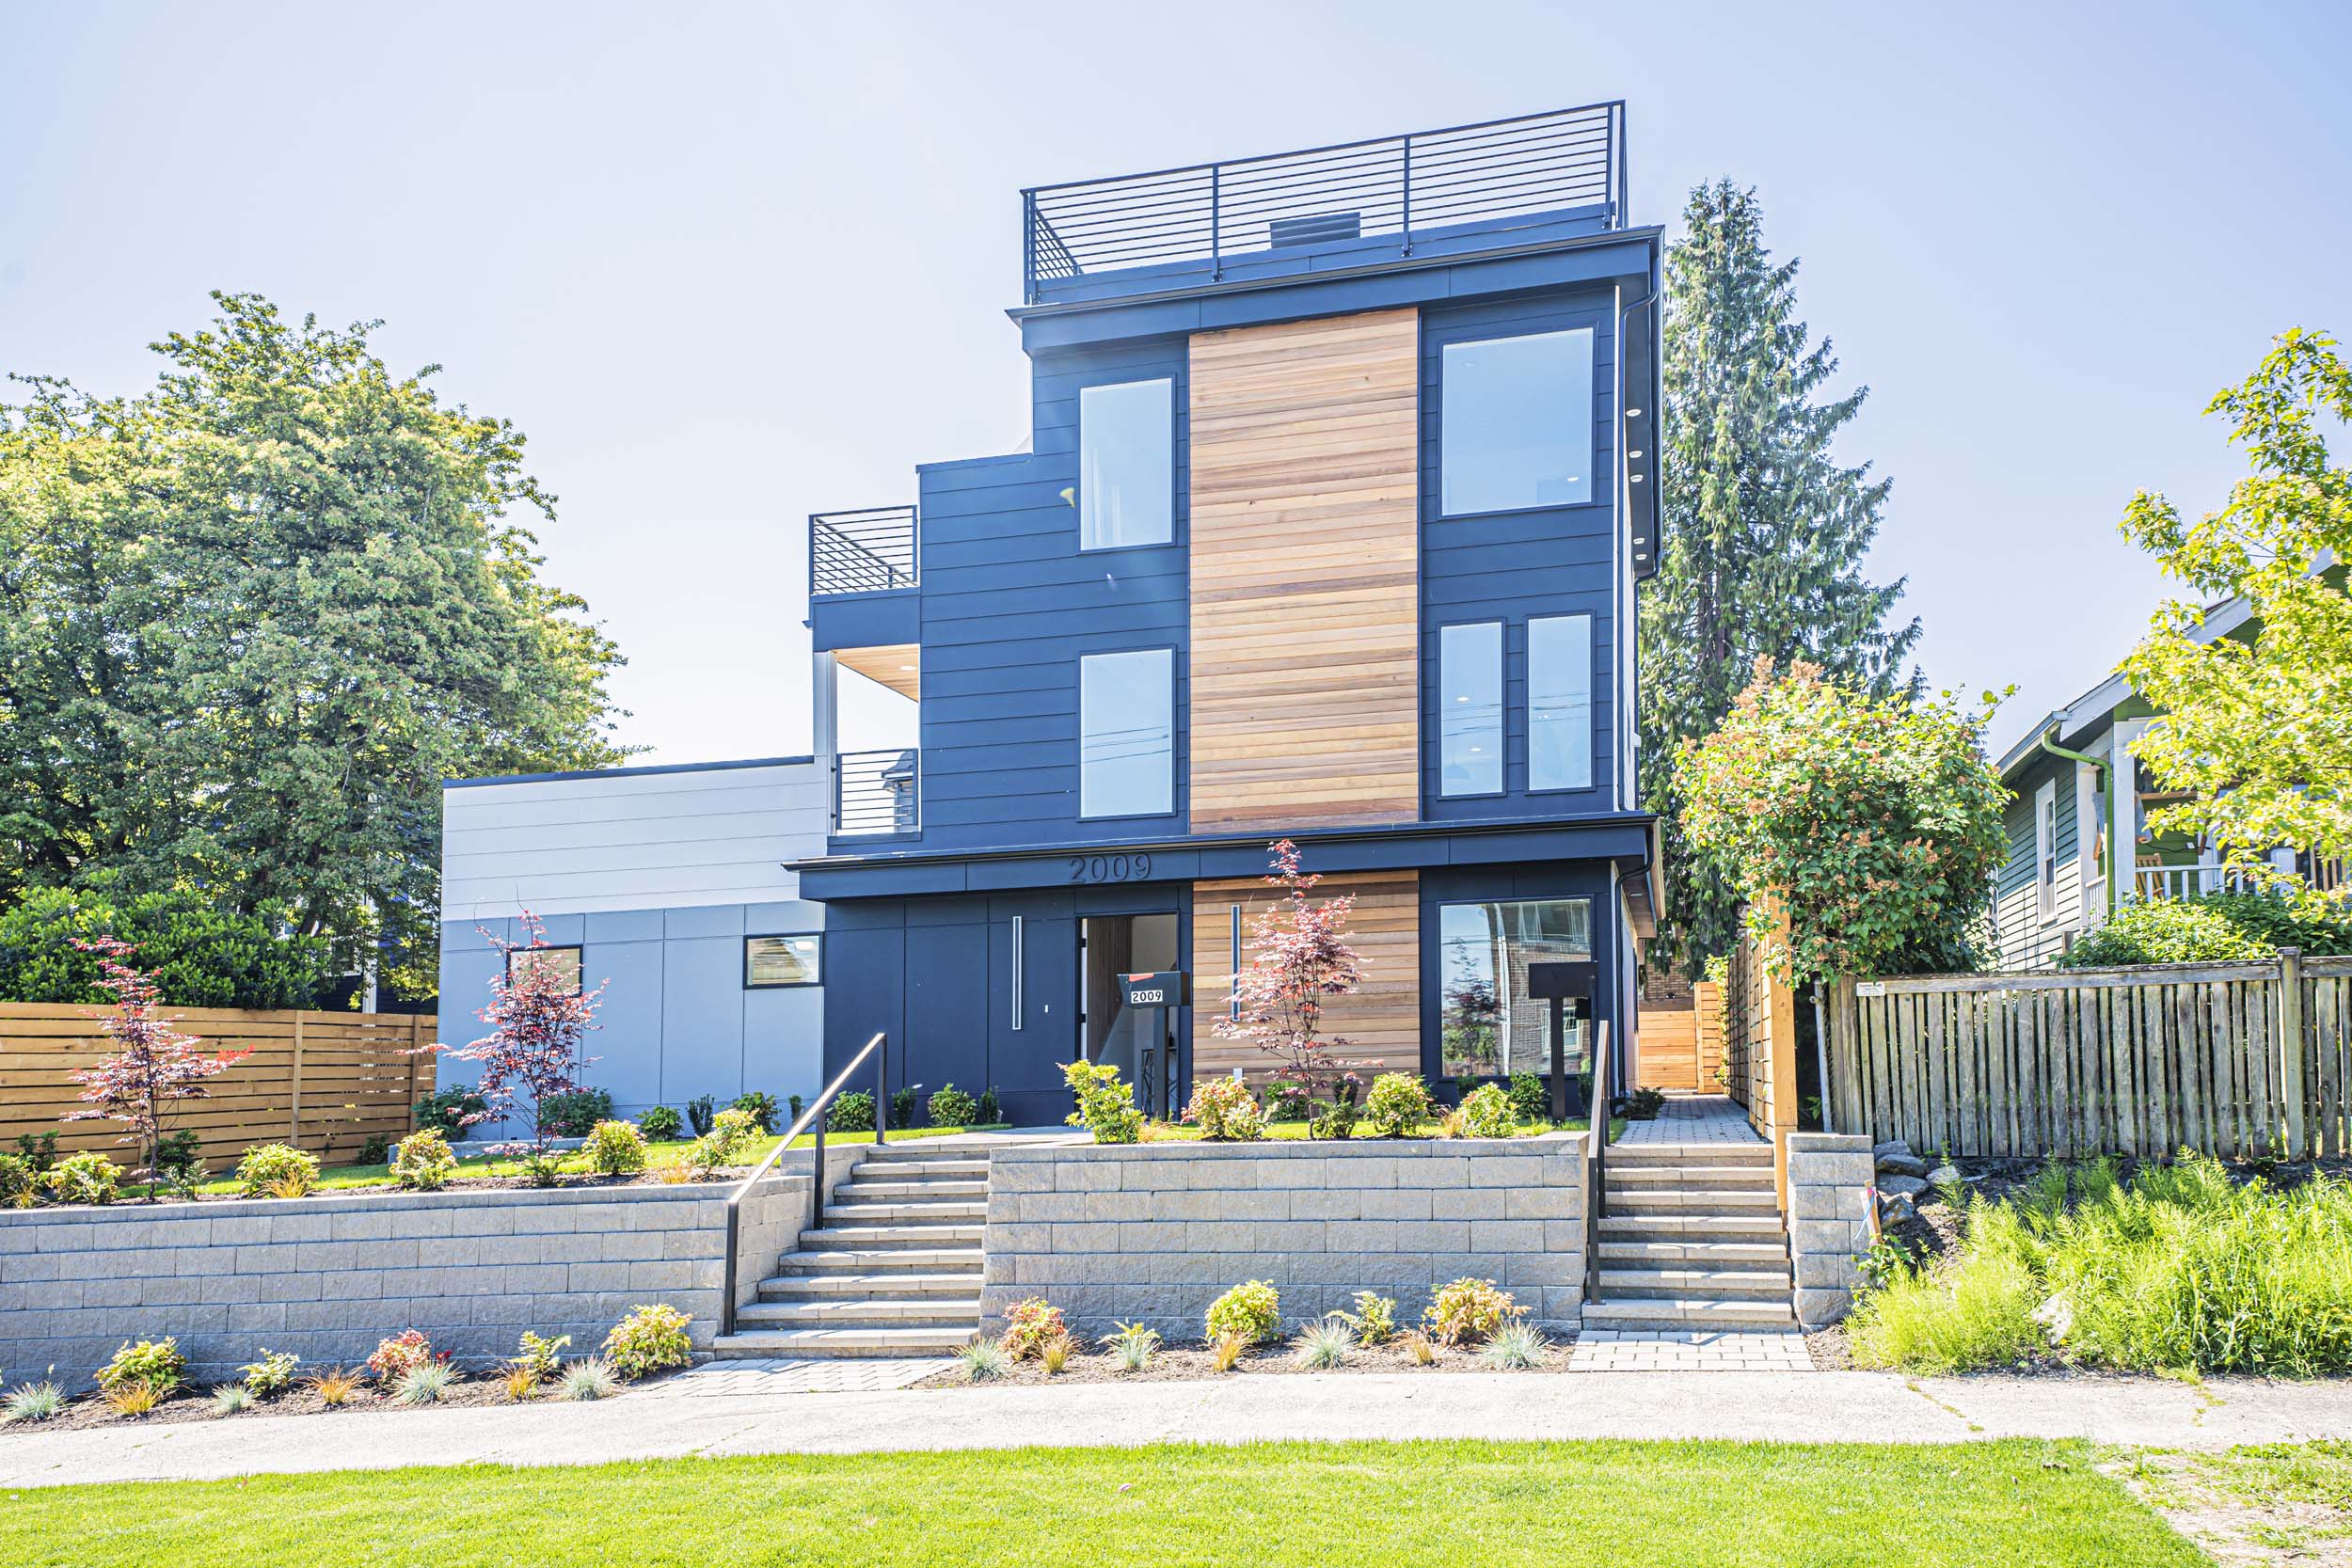 Exterior photos of a brand new SFR construction located at 2009 S Stevens St Seattle, WA 98144